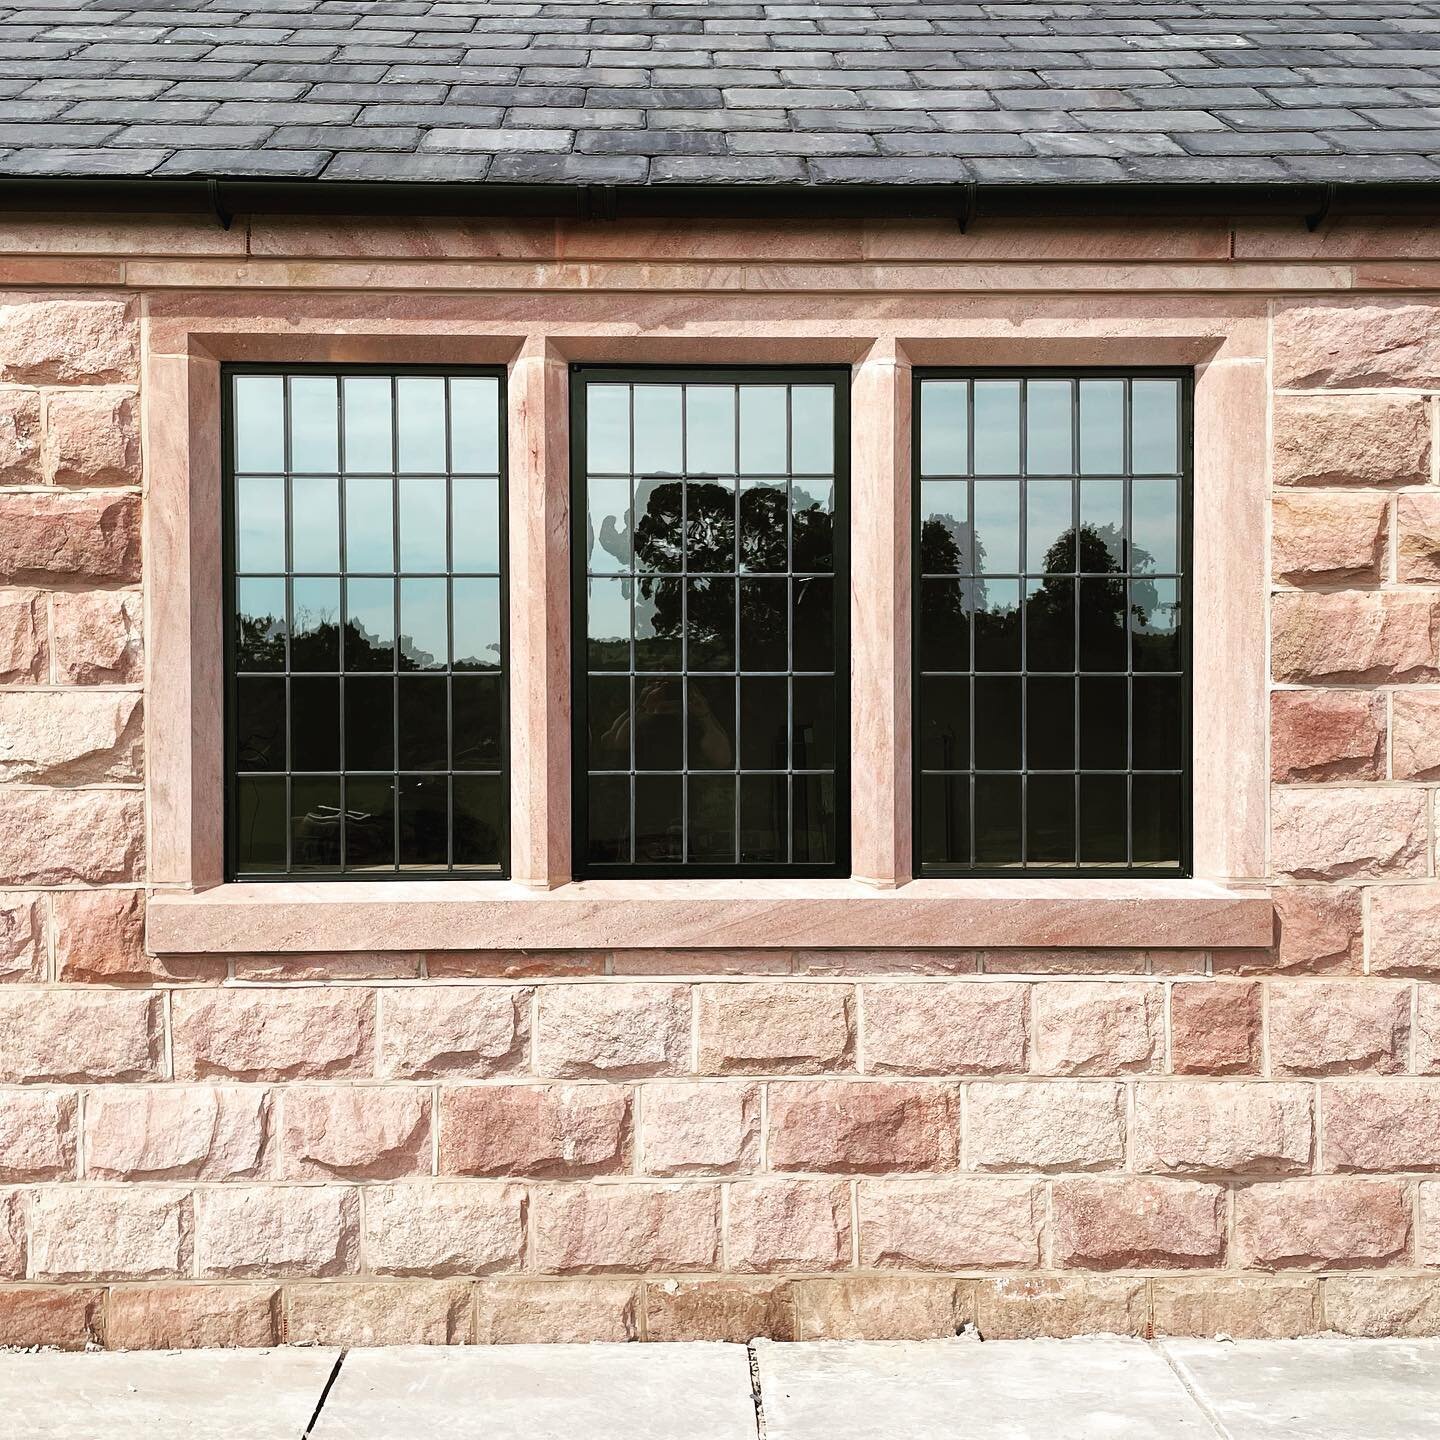 Our Insulead and Steelyte glazing system using our own Albion Crowne glass, finished with 9mm lead. 
#historic #glazing #listed #conservation #heritage #glazingsystem #windows #stonemullions #newbuild #modernglazing